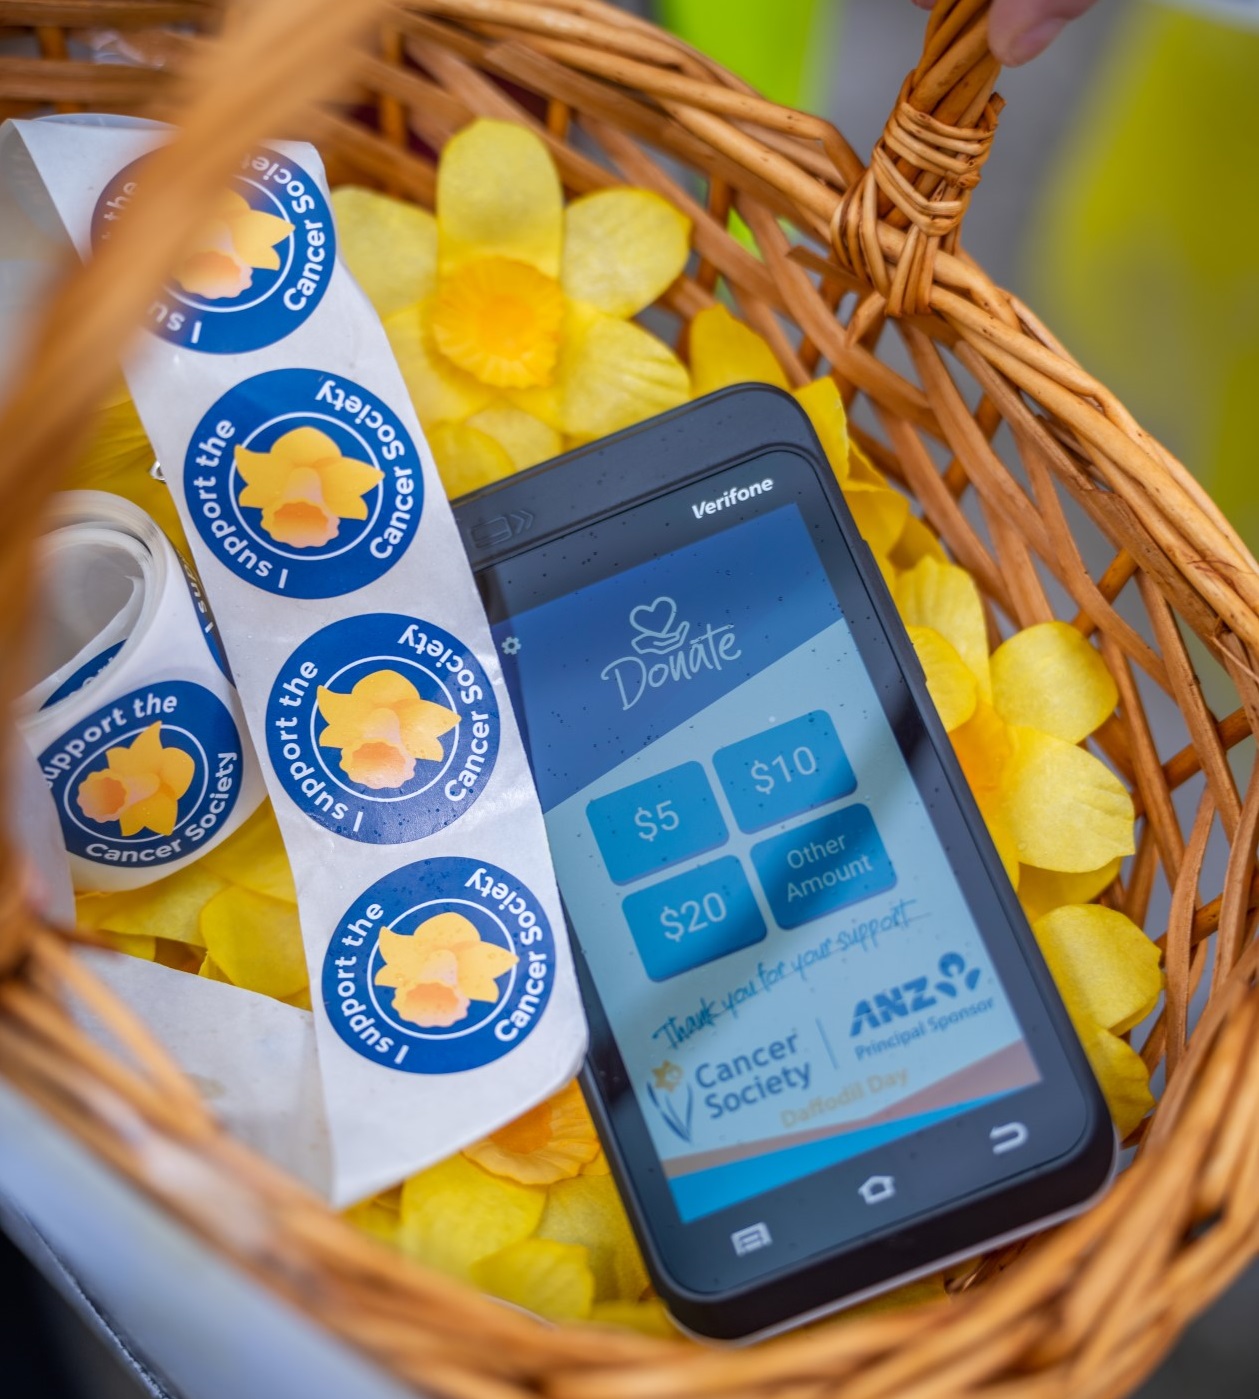 Daffodil Day Gets An Android Update